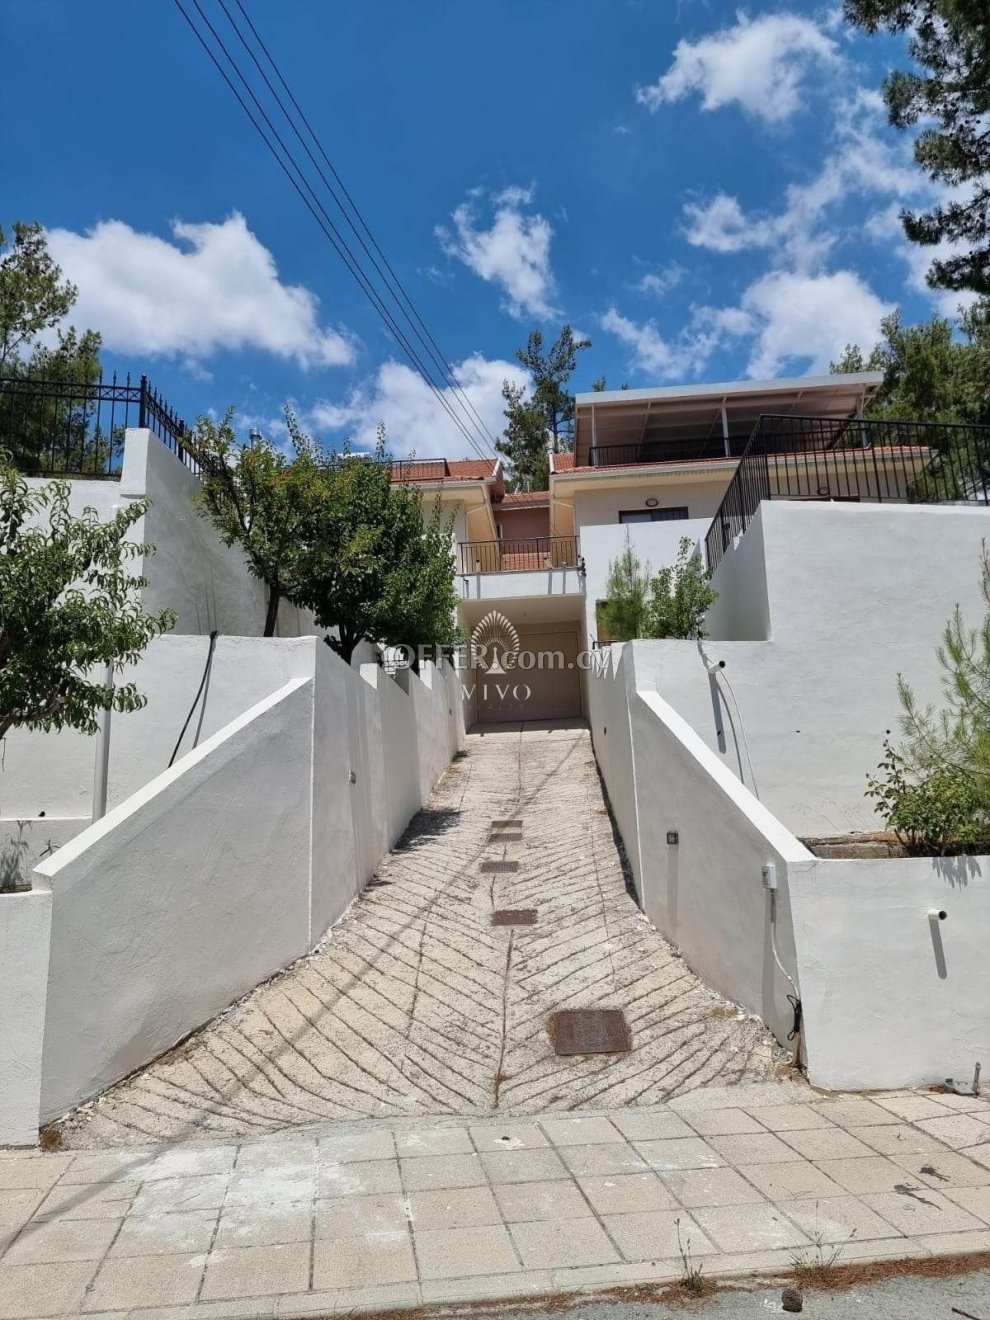 2  SEMI-DETACHED HOUSES FOR SALE IN MONIATIS VILLAGE WITH FANTASTIC MOUNTAIN VIEW - 8